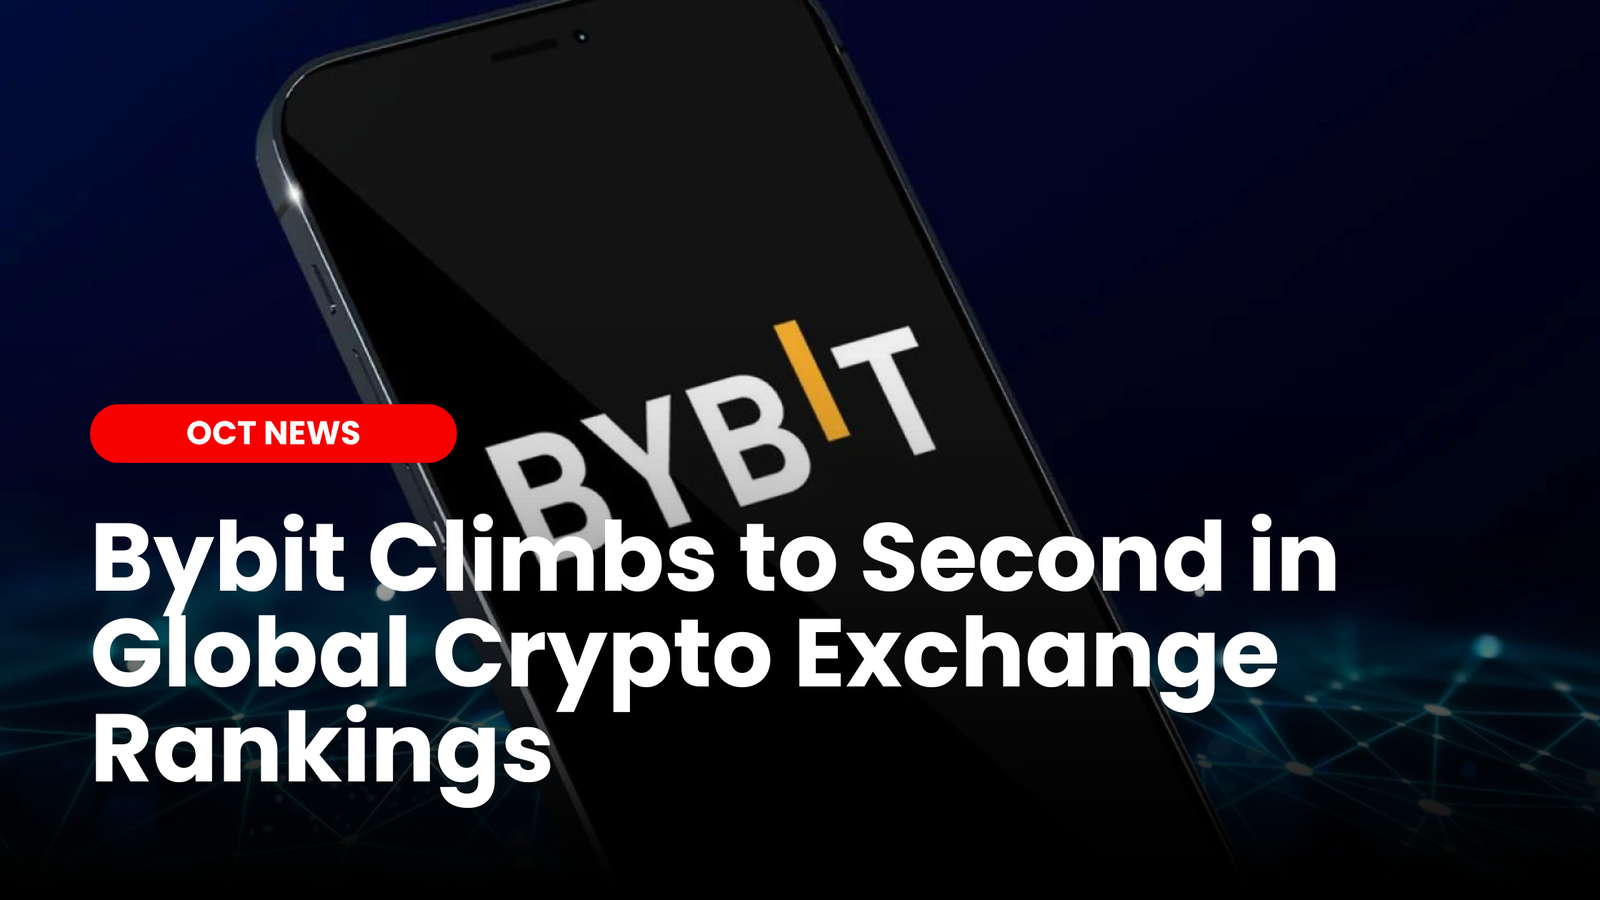 Bybit Climbs to Second in Global Crypto Exchange Rankings